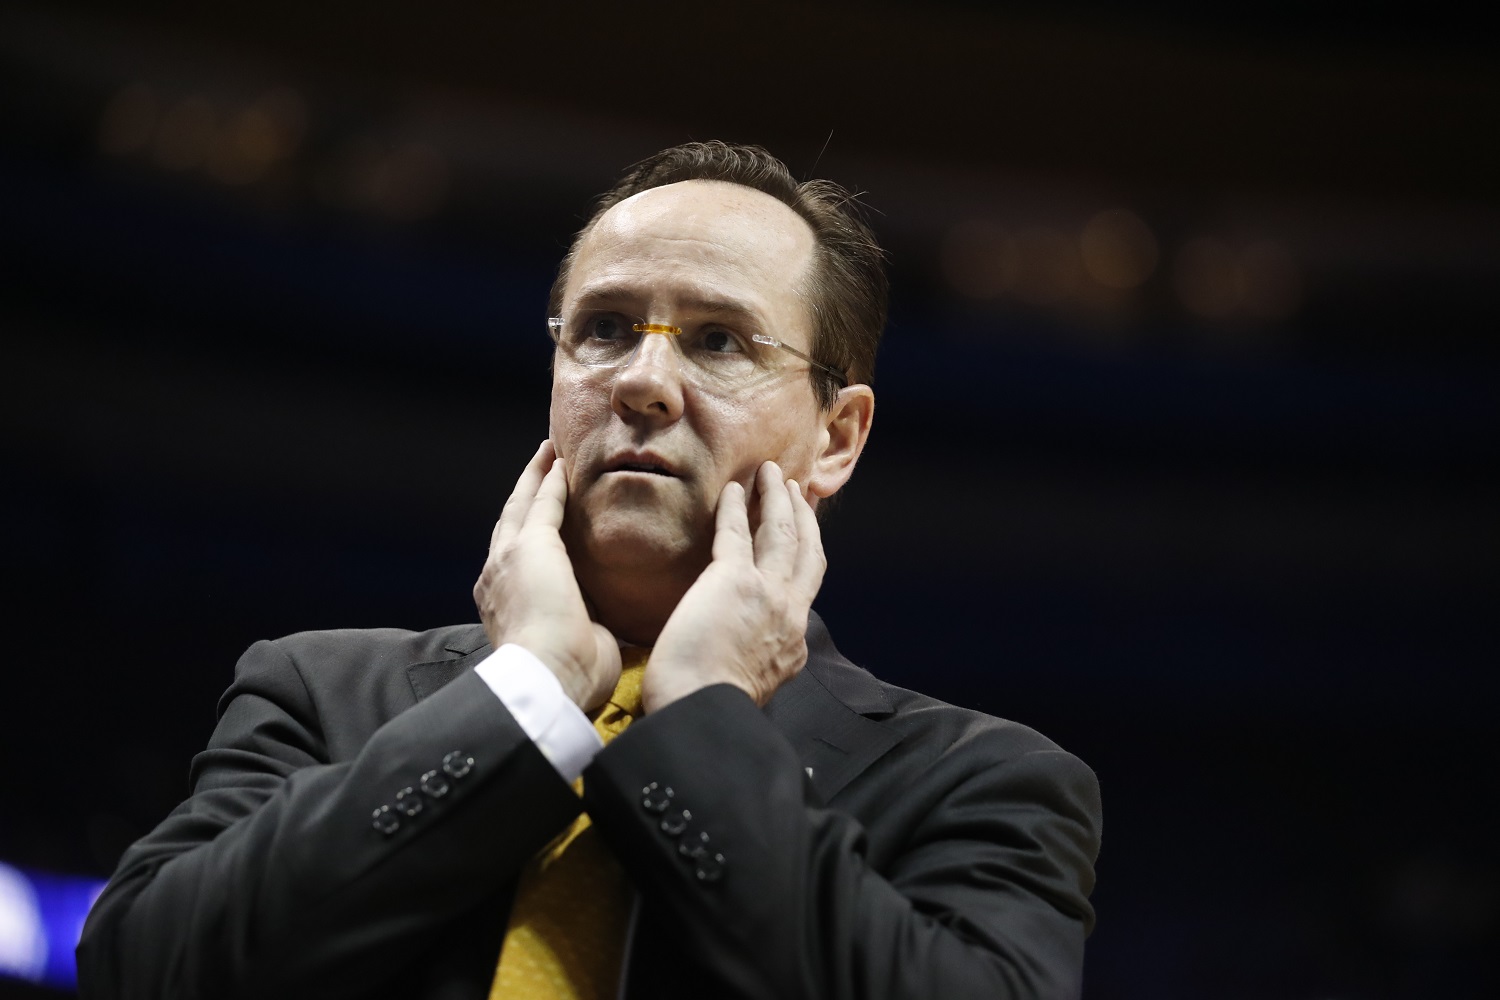 Wichita State head coach Gregg Marshall is seen on the sidelines during the first half of an NCAA college basketball game against Illinois State in the championship of the Missouri Valley Conference men's tournament Sunday, March 5, 2017, in St. Louis. (AP Photo/Jeff Roberson)